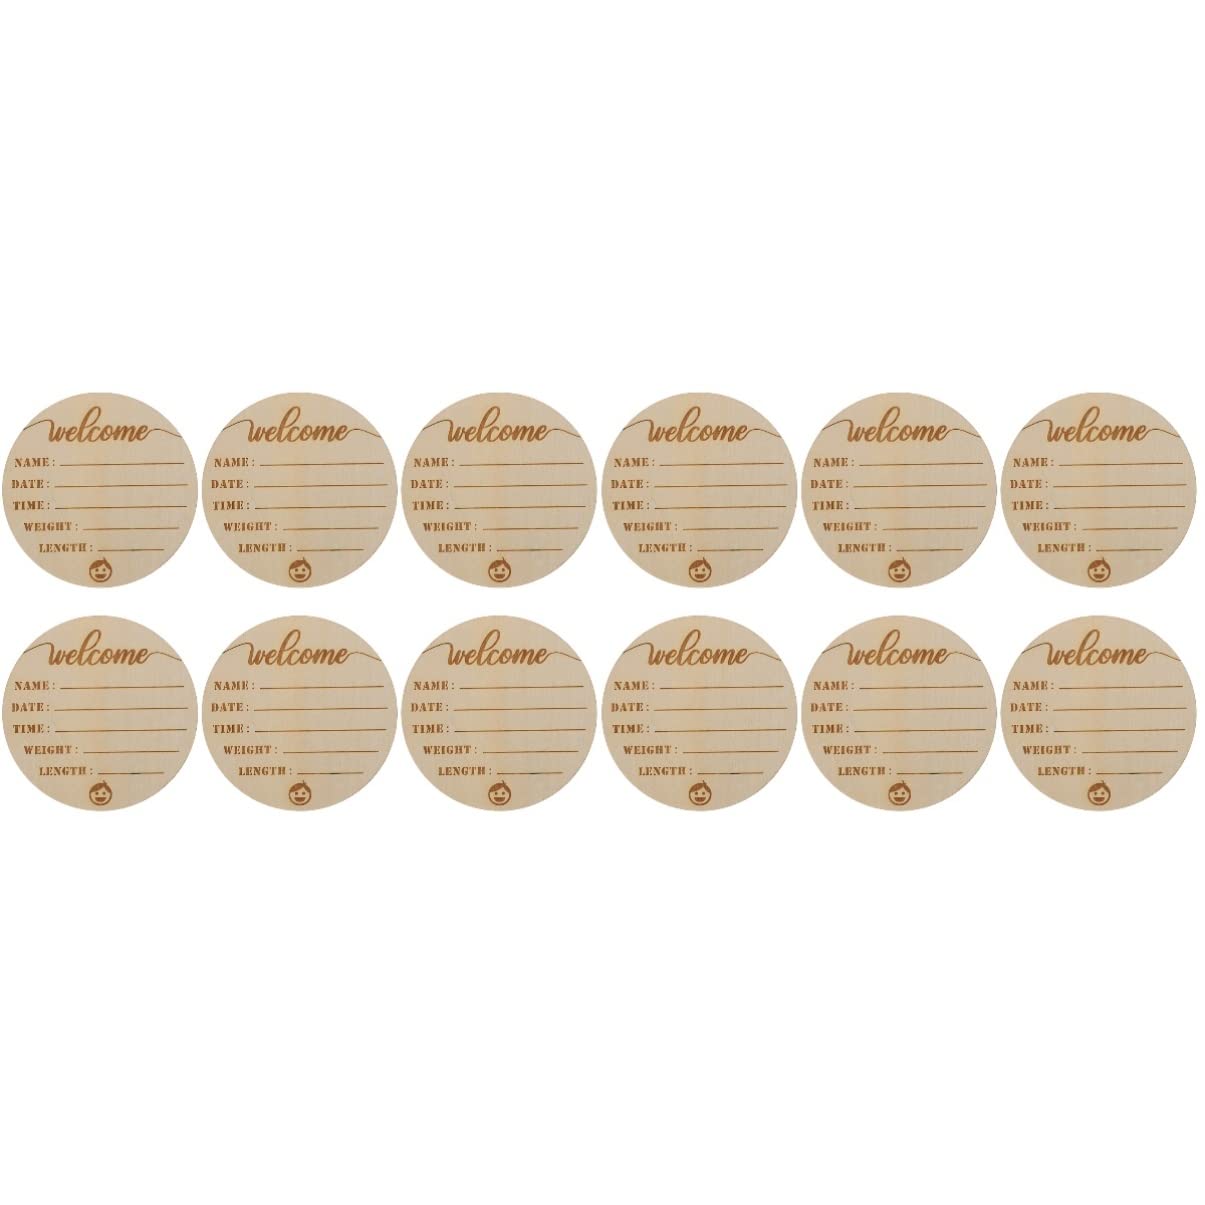 BESTOYARD 12 pcs Birth Plaque Wood Baby Milestone Baby Announcement Board Baby boy Milestone Sign Infant Name Date Sign Baby Signs Baby Wooden Name Signs Newborn Photography Card Christmas